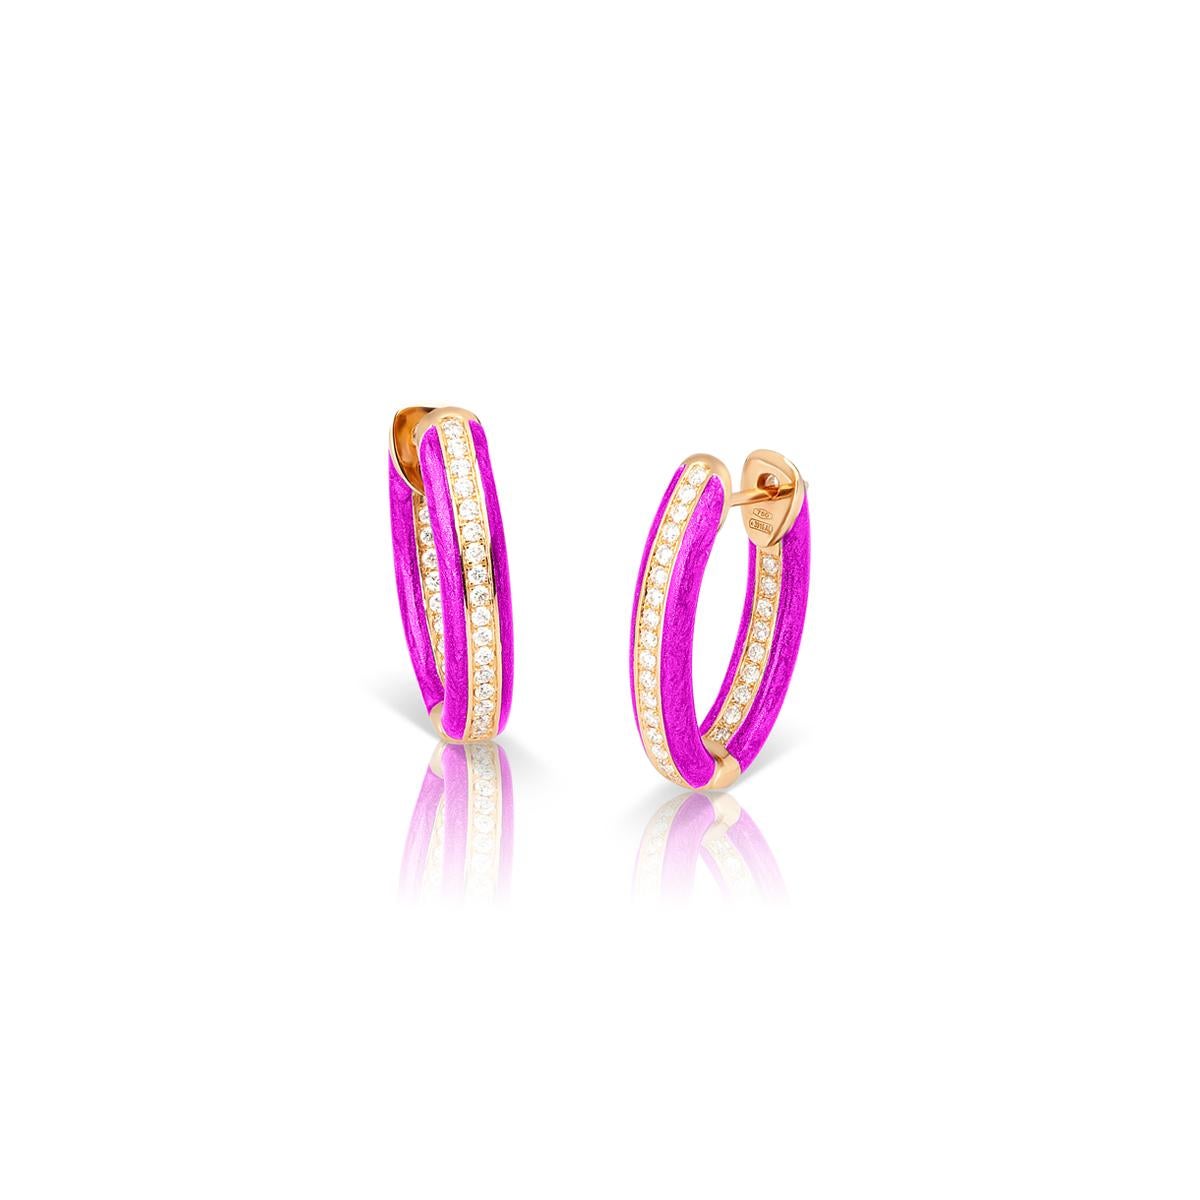 Round Cut Custom Color Enamel Mini Hoop Earrings with White Diamonds in 18kt Rose Gold For Sale